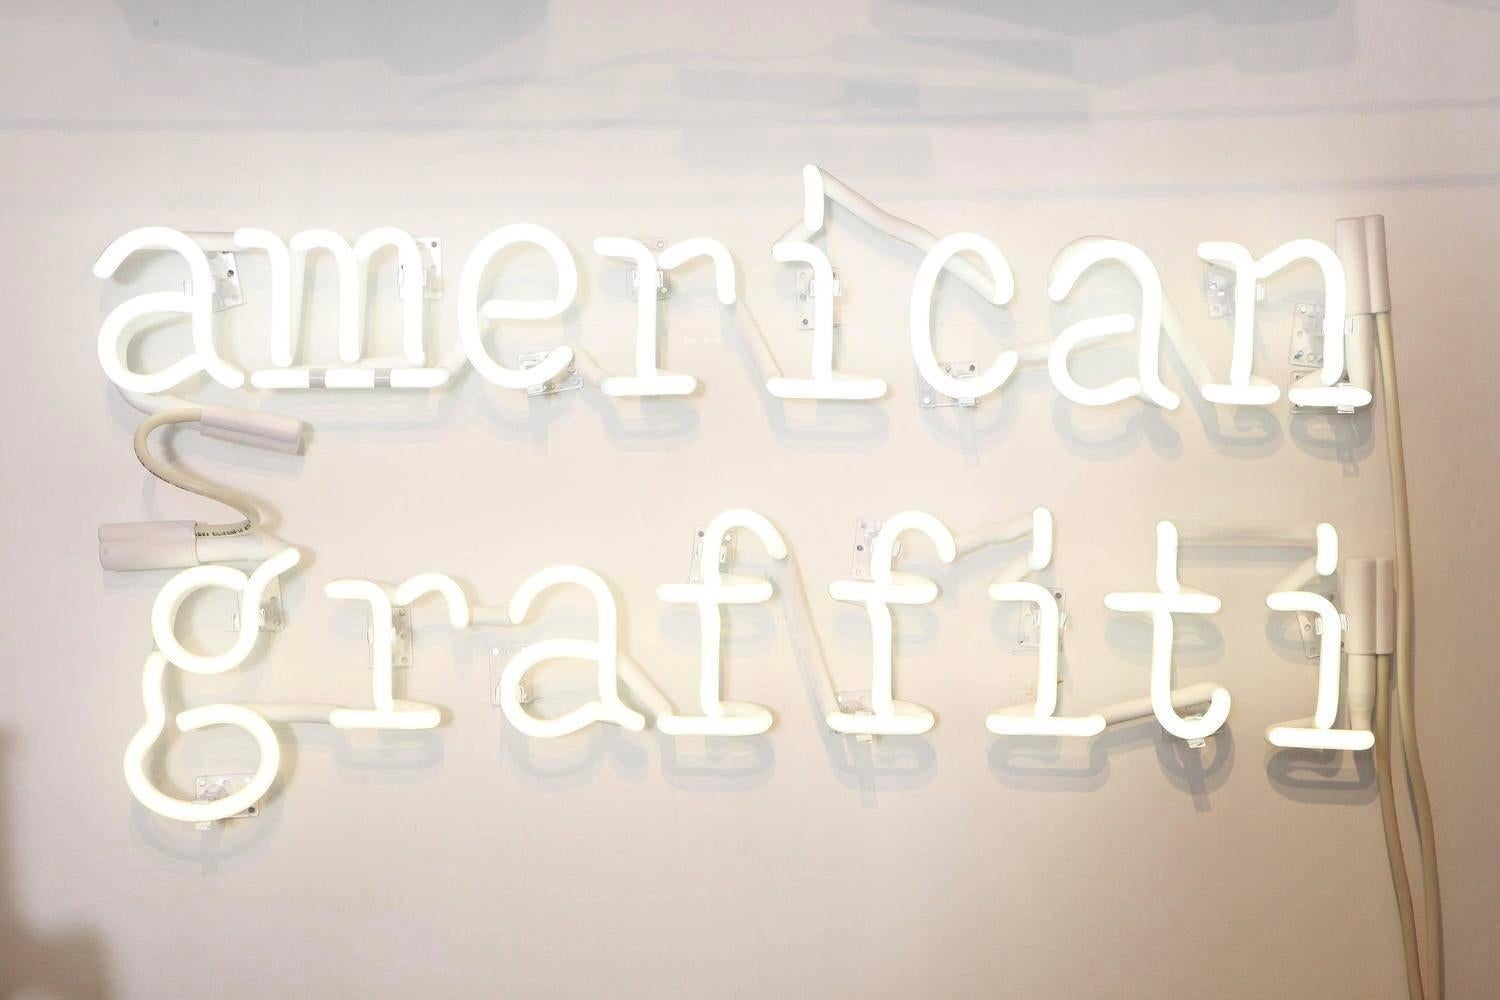 Contemporary New York artist Peter Buchman's American Graffiti Neon is in white for a reason. It's clean, clear, not cluttered, not everywhere and not obnoxious. The phrase is about his continued introspection of words and writing as well as our